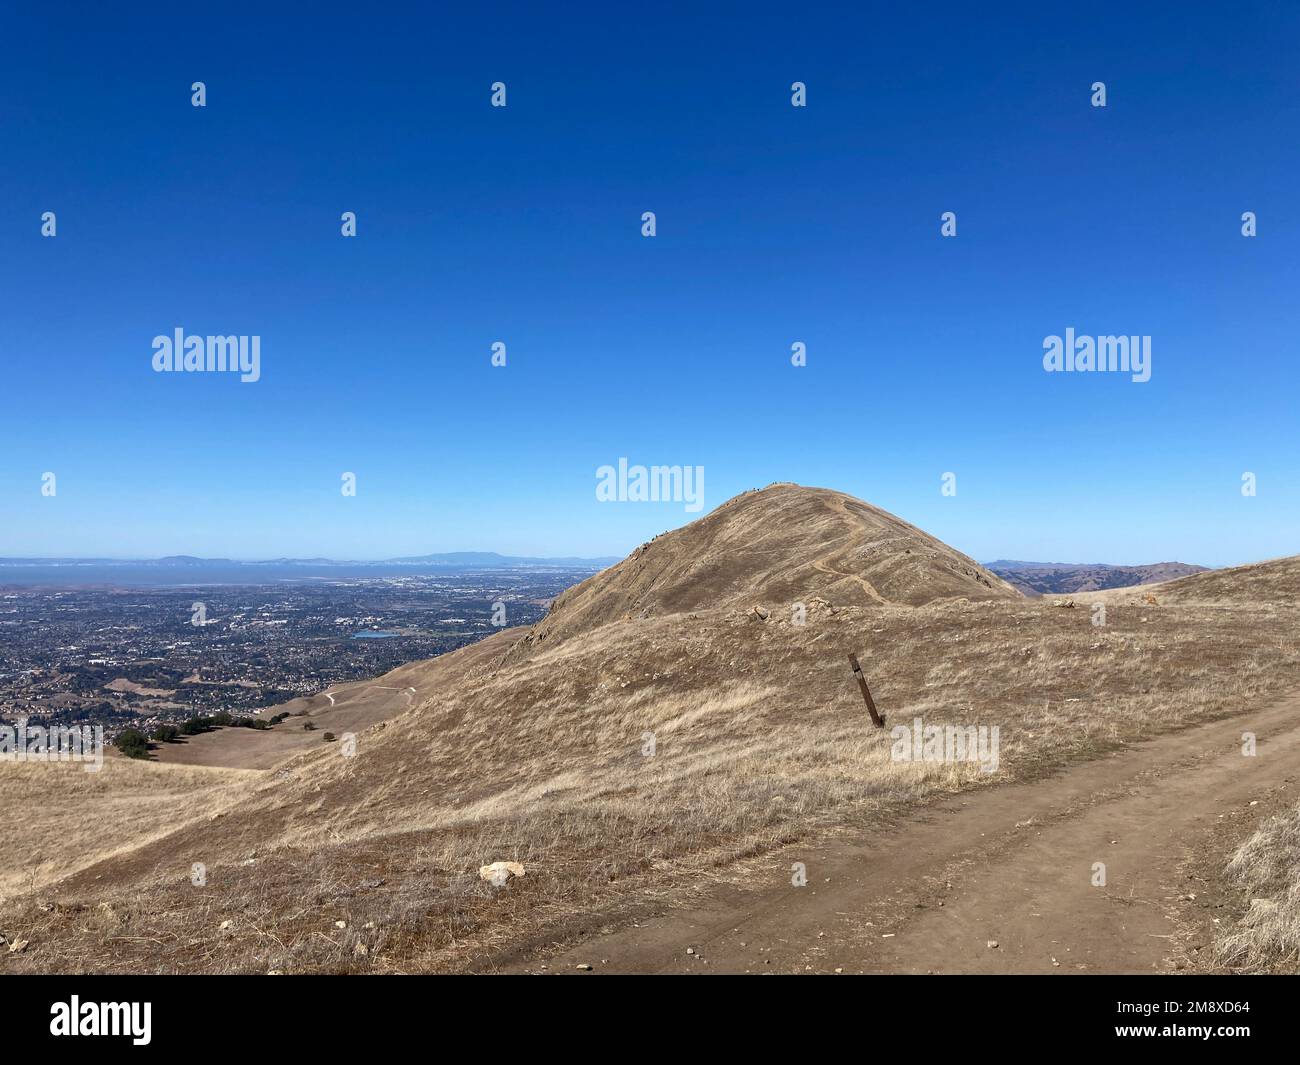 Aerial panoramic view of San Francisco Bay Area from hiking trail leading to MIssion Peak during fall season. Stock Photo